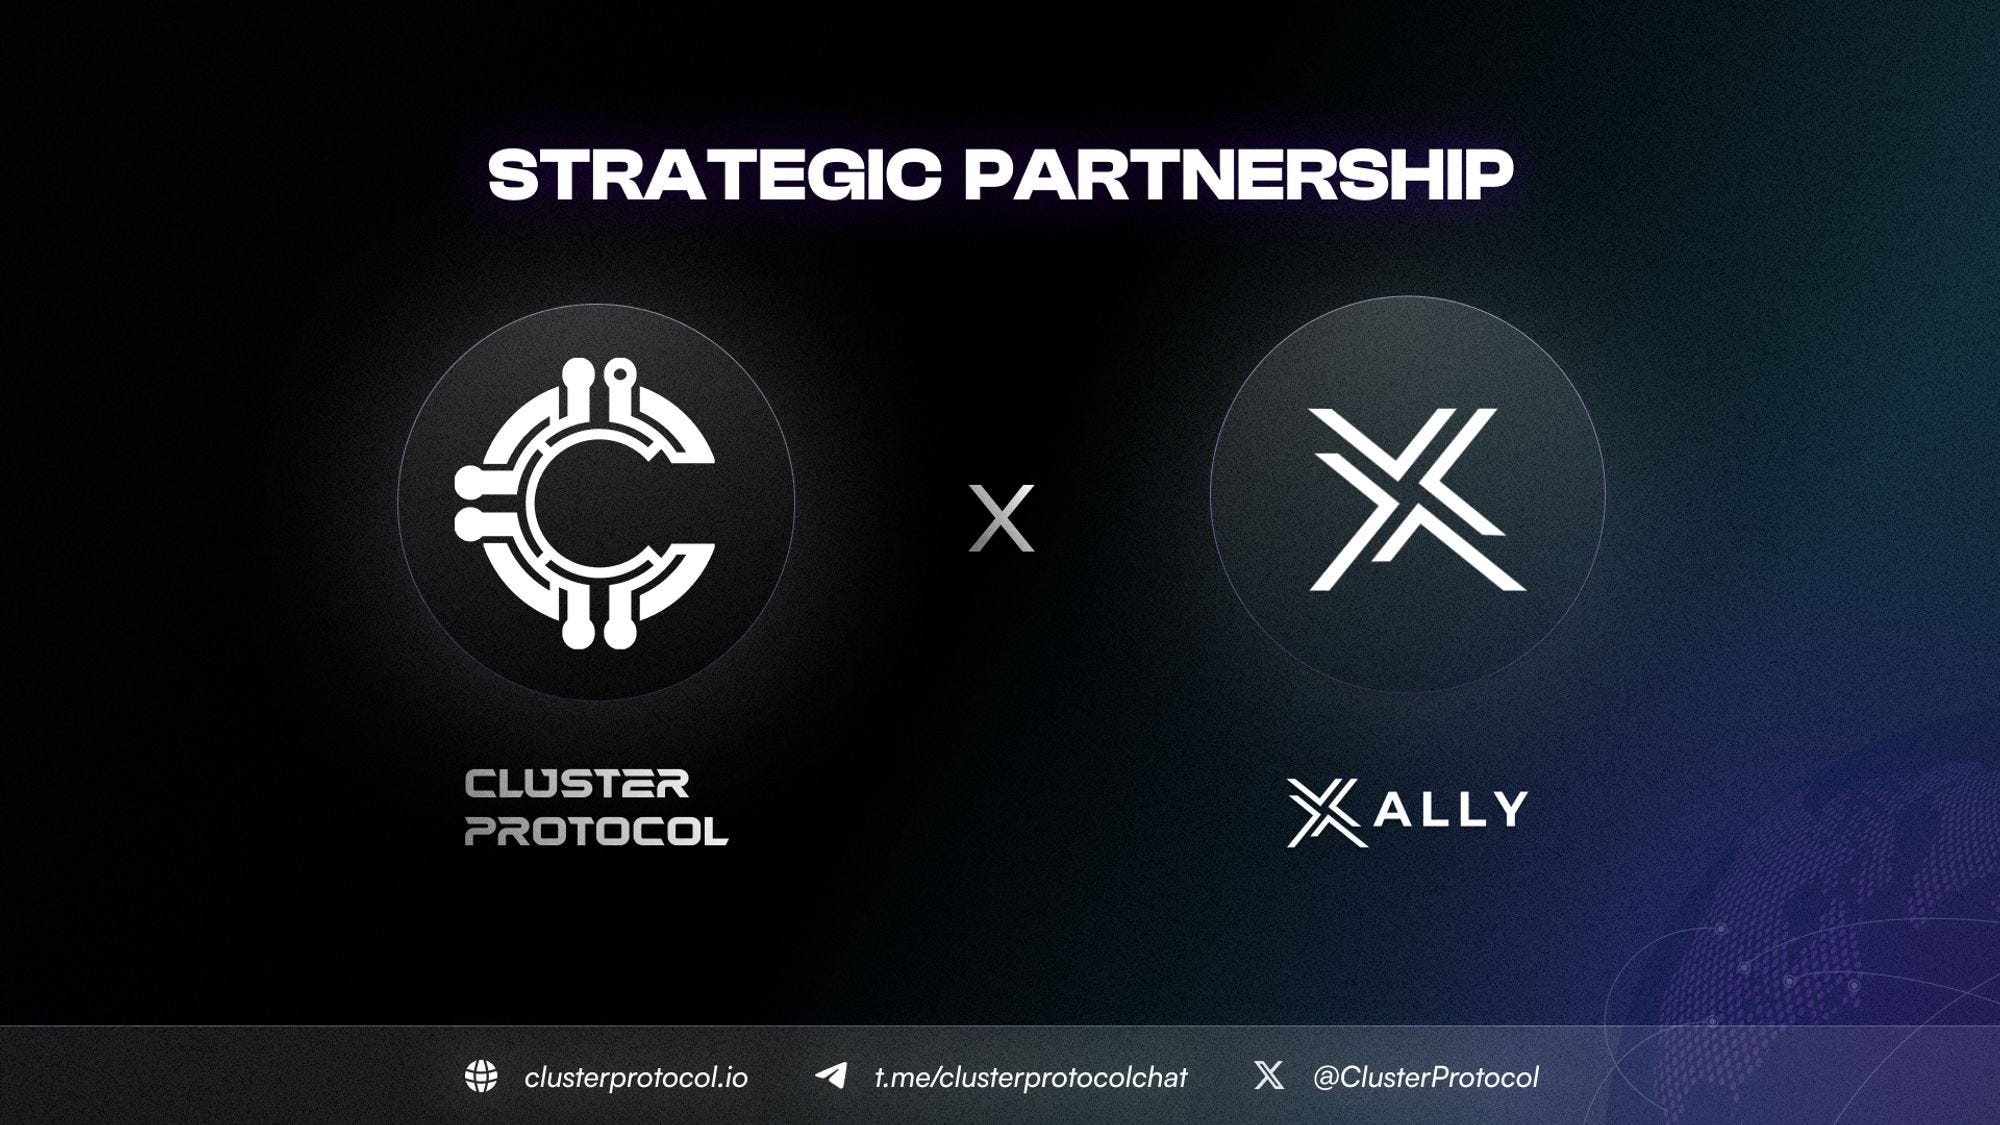 Cluster Protocol announces its strategic partnership with Xally